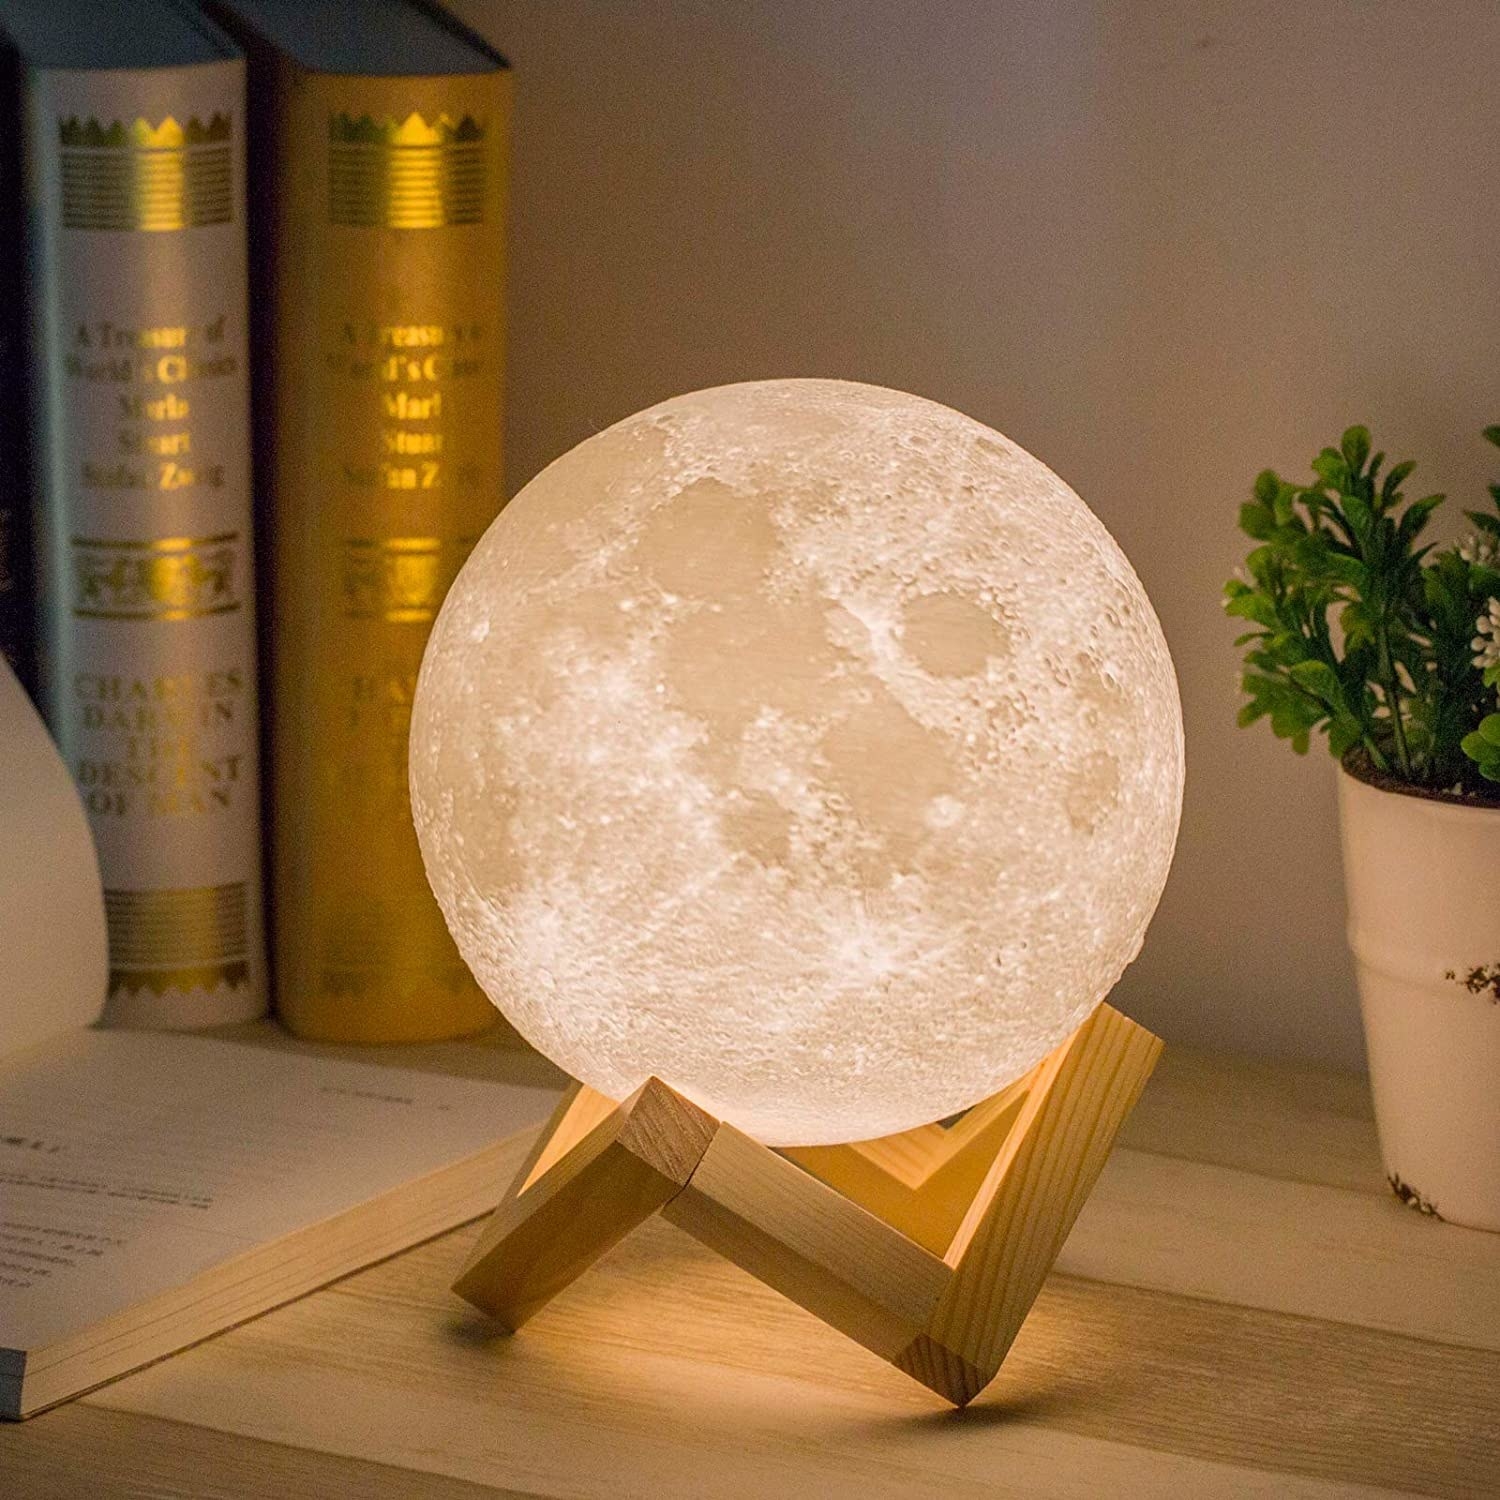 The moon lamp sitting into a wooden stand